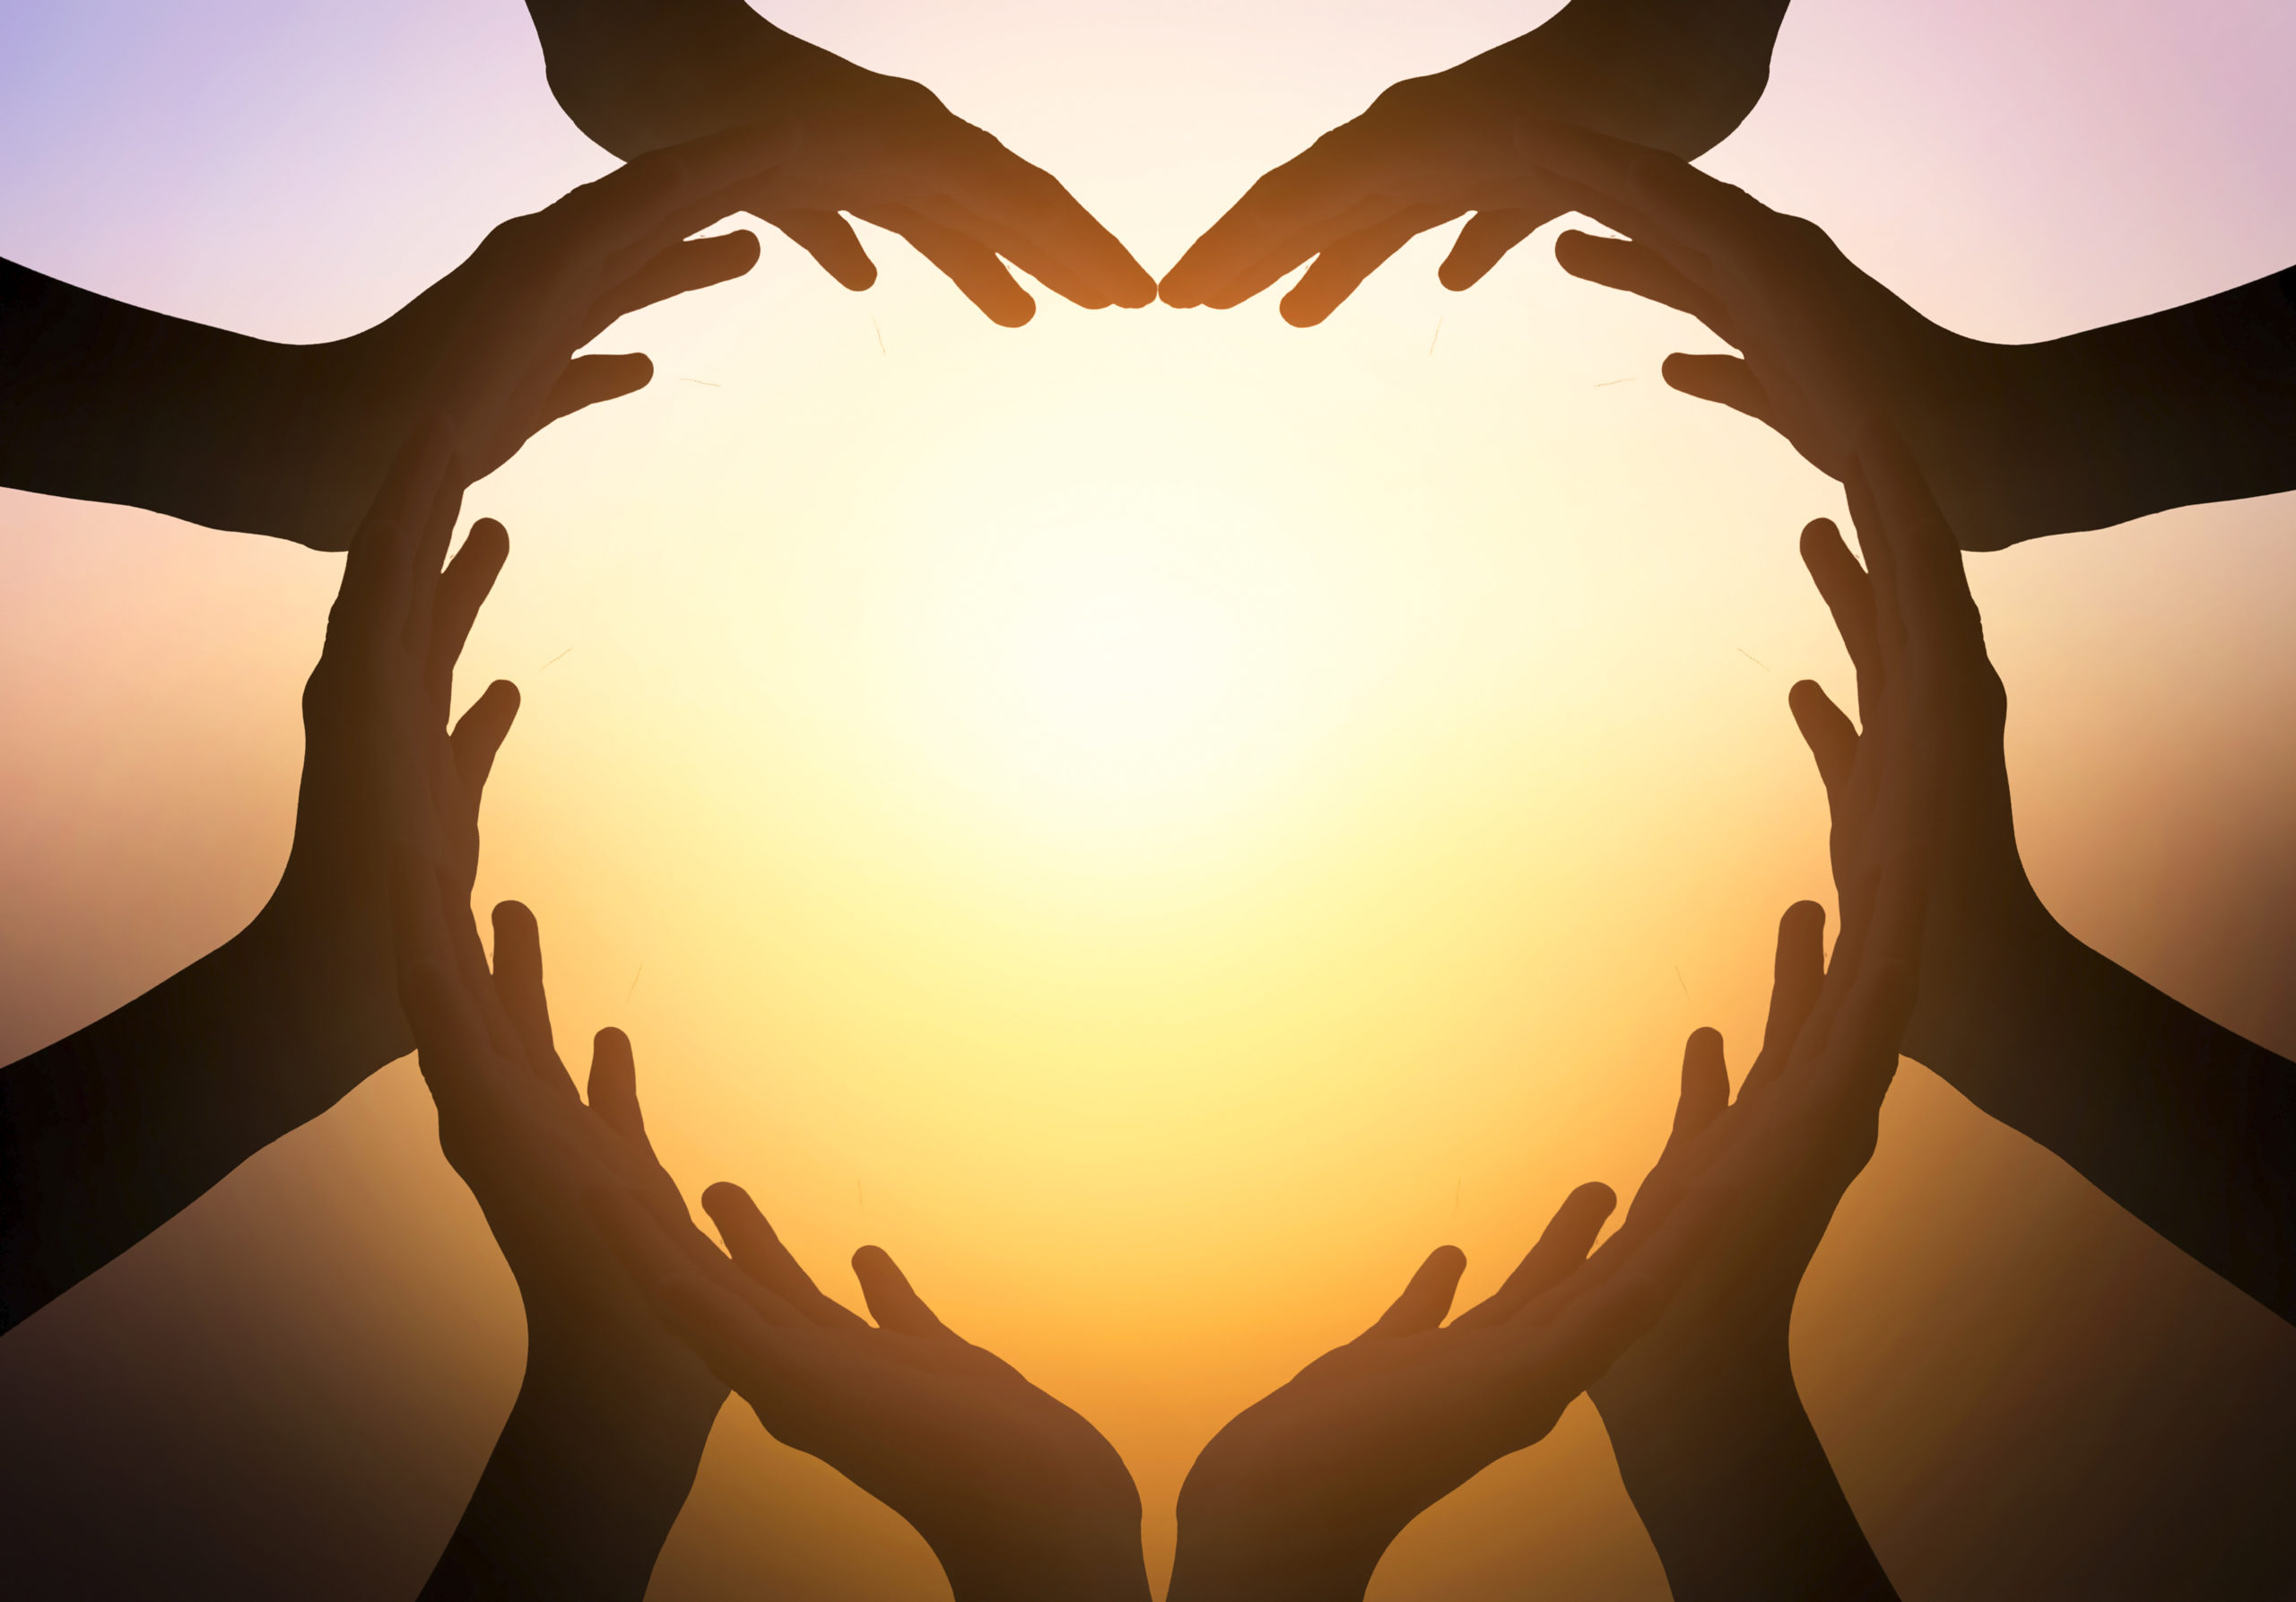 A groupe of people create a heart shape with all of their hands, shown in silhouette against a sunset.